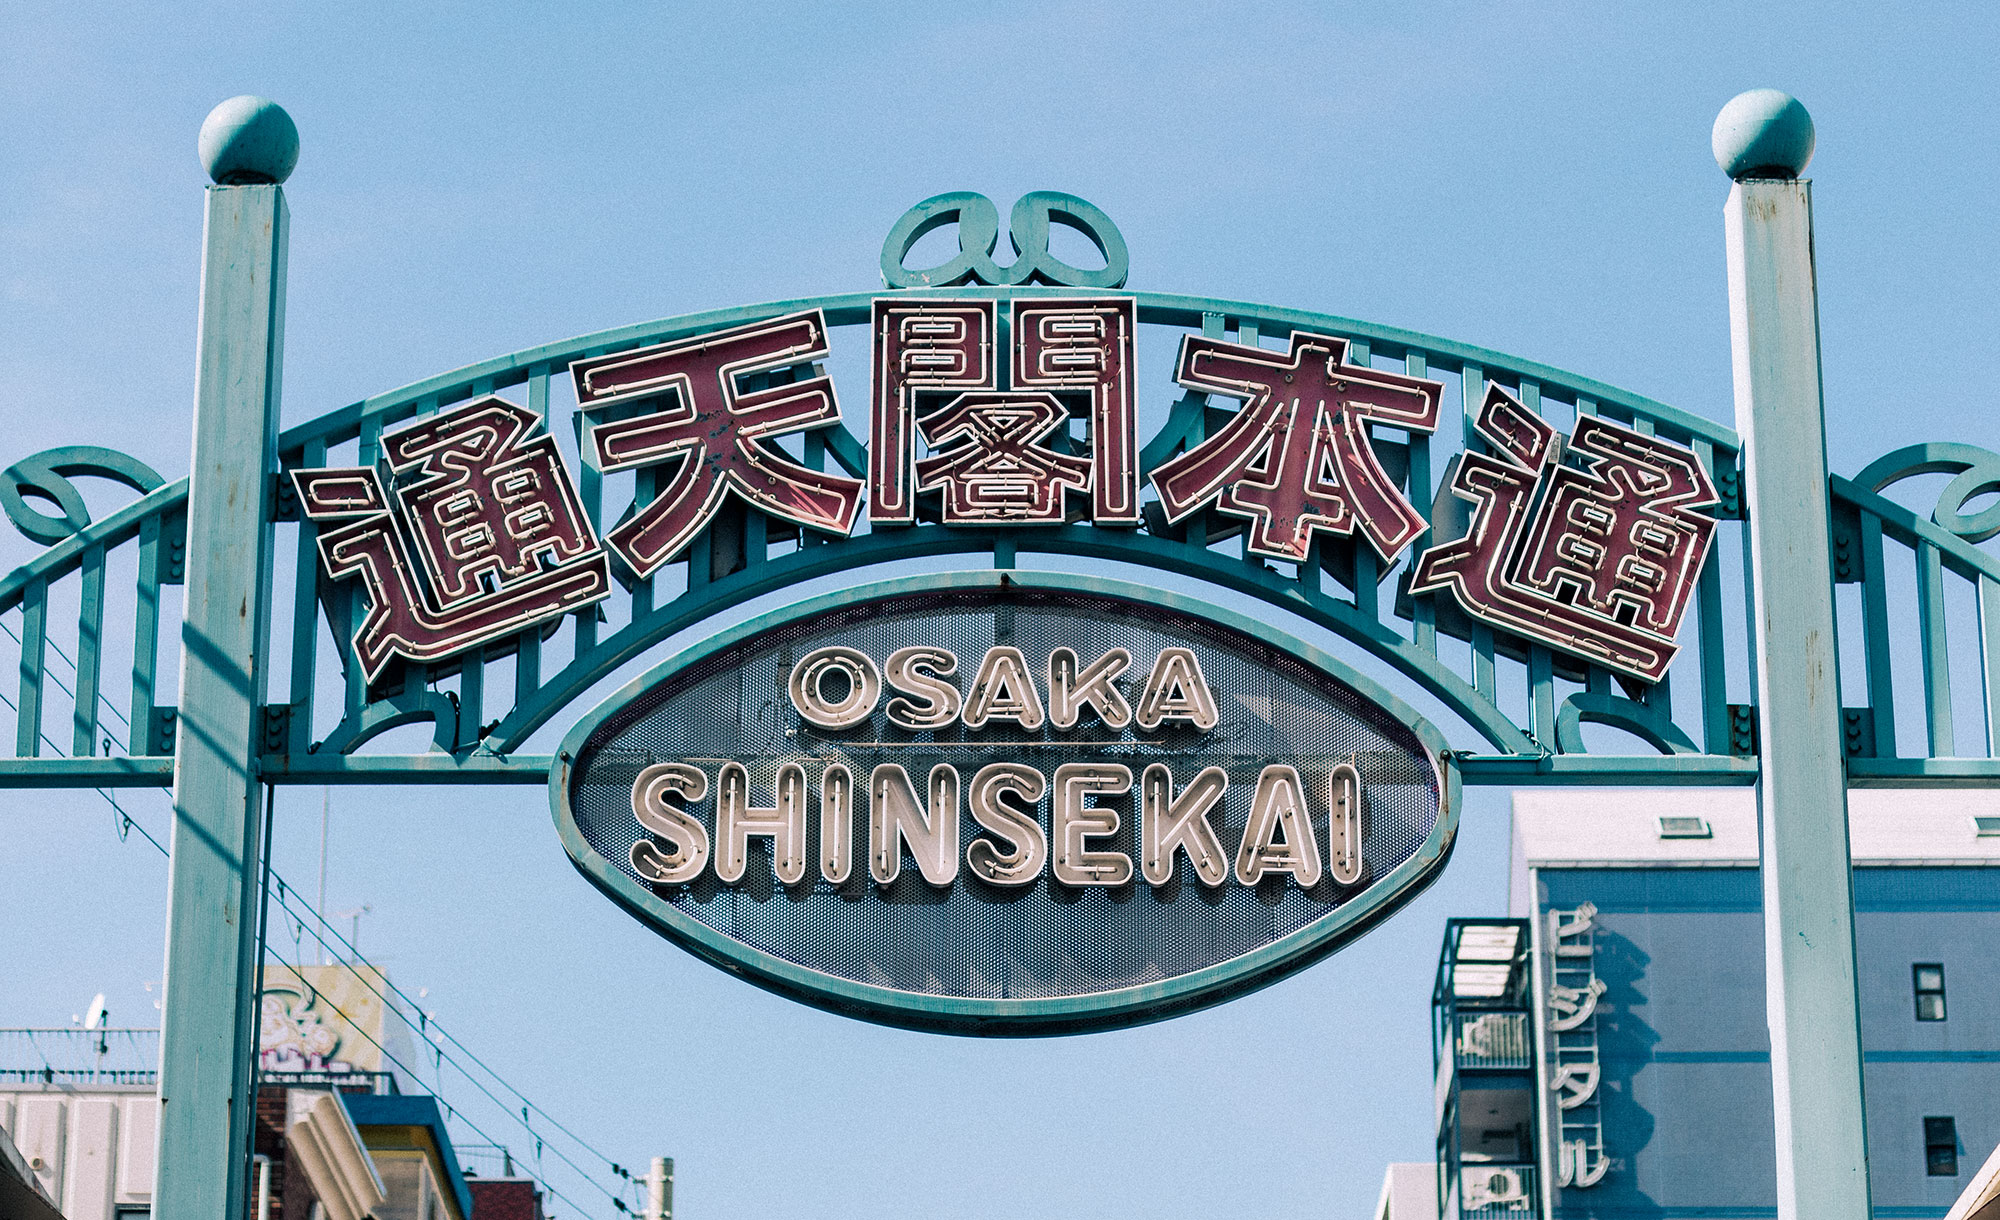 Shinsekai / 8 Reasons Why You Should Visit Osaka 大阪市 – A Quick Travel Guide to Osaka, Japan by iHeartAlice.com – Travel, Lifestyle, Style & Foodblog by Alice M. Huynh